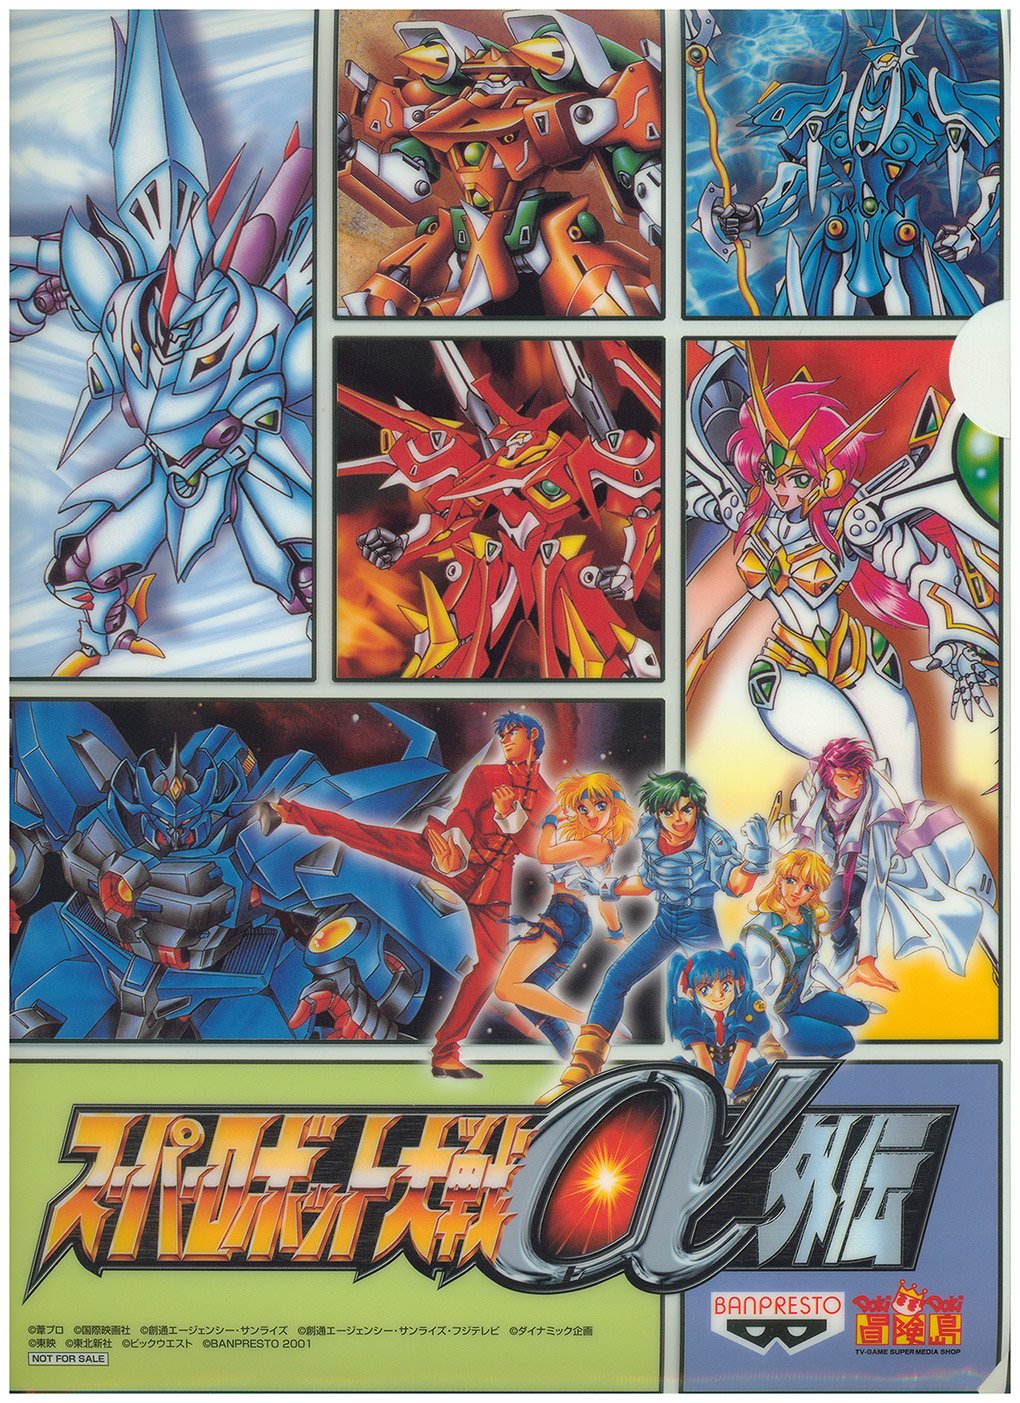 SRW Collection on Twitter: "A4 CLEARFILE FOLDER PRE-ORDER GIFT #SCAN SUPER ROBOT WARS ALPHA GAIDEN (PS1) #retrogaming #SRW25th https://t.co/RrrM2PRA0n" / Twitter